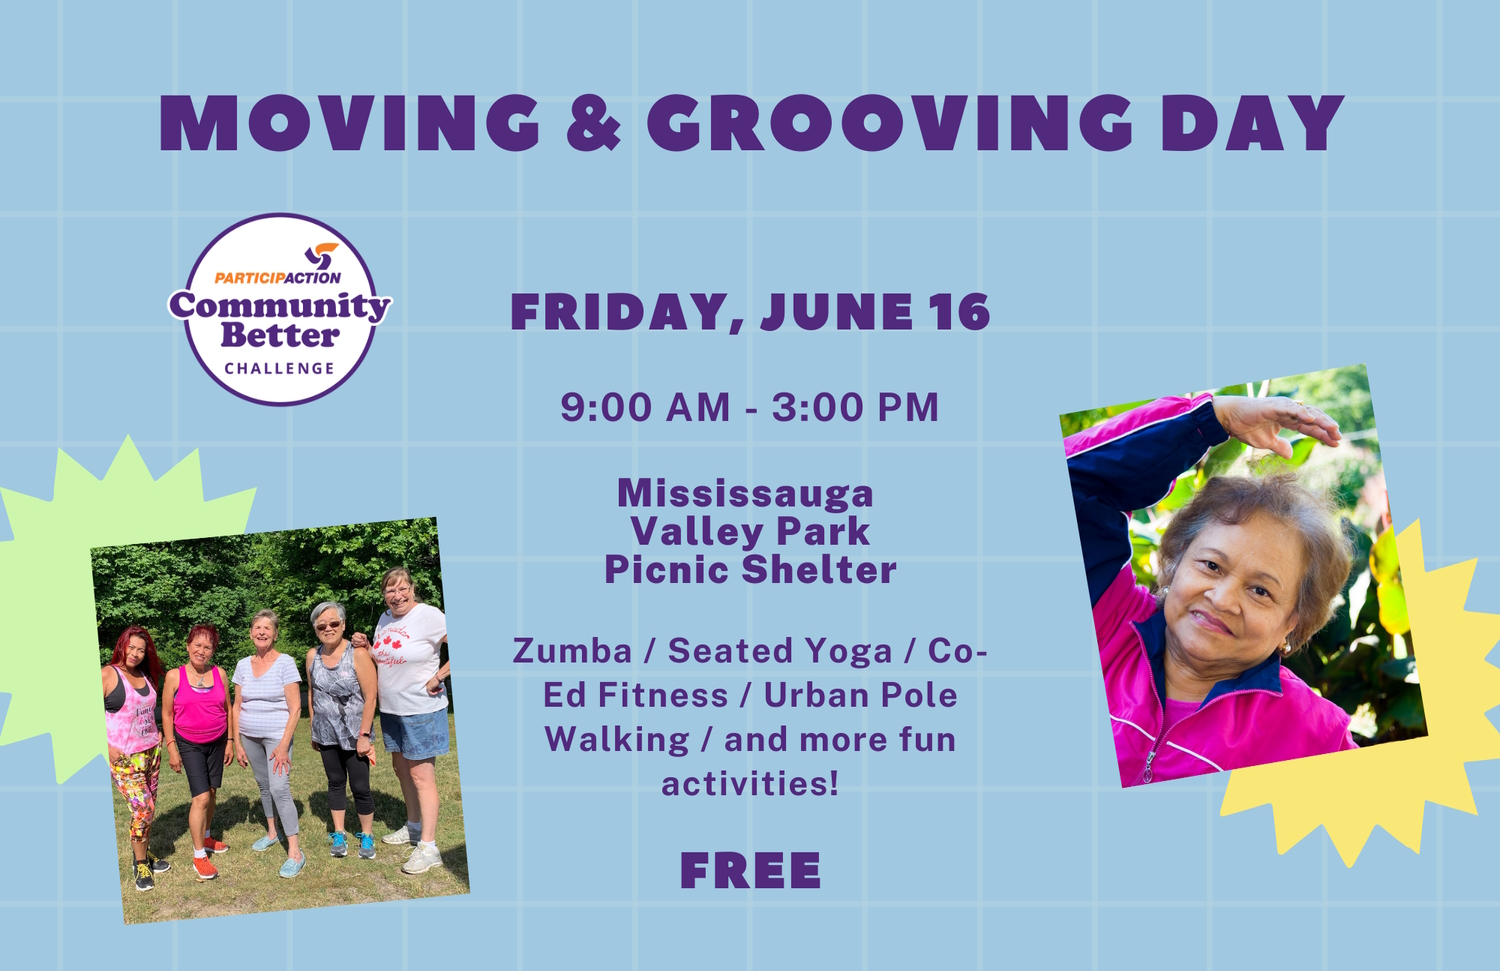 Moving & Grooving Day at Mississauga Valley Park Picnic Shelter